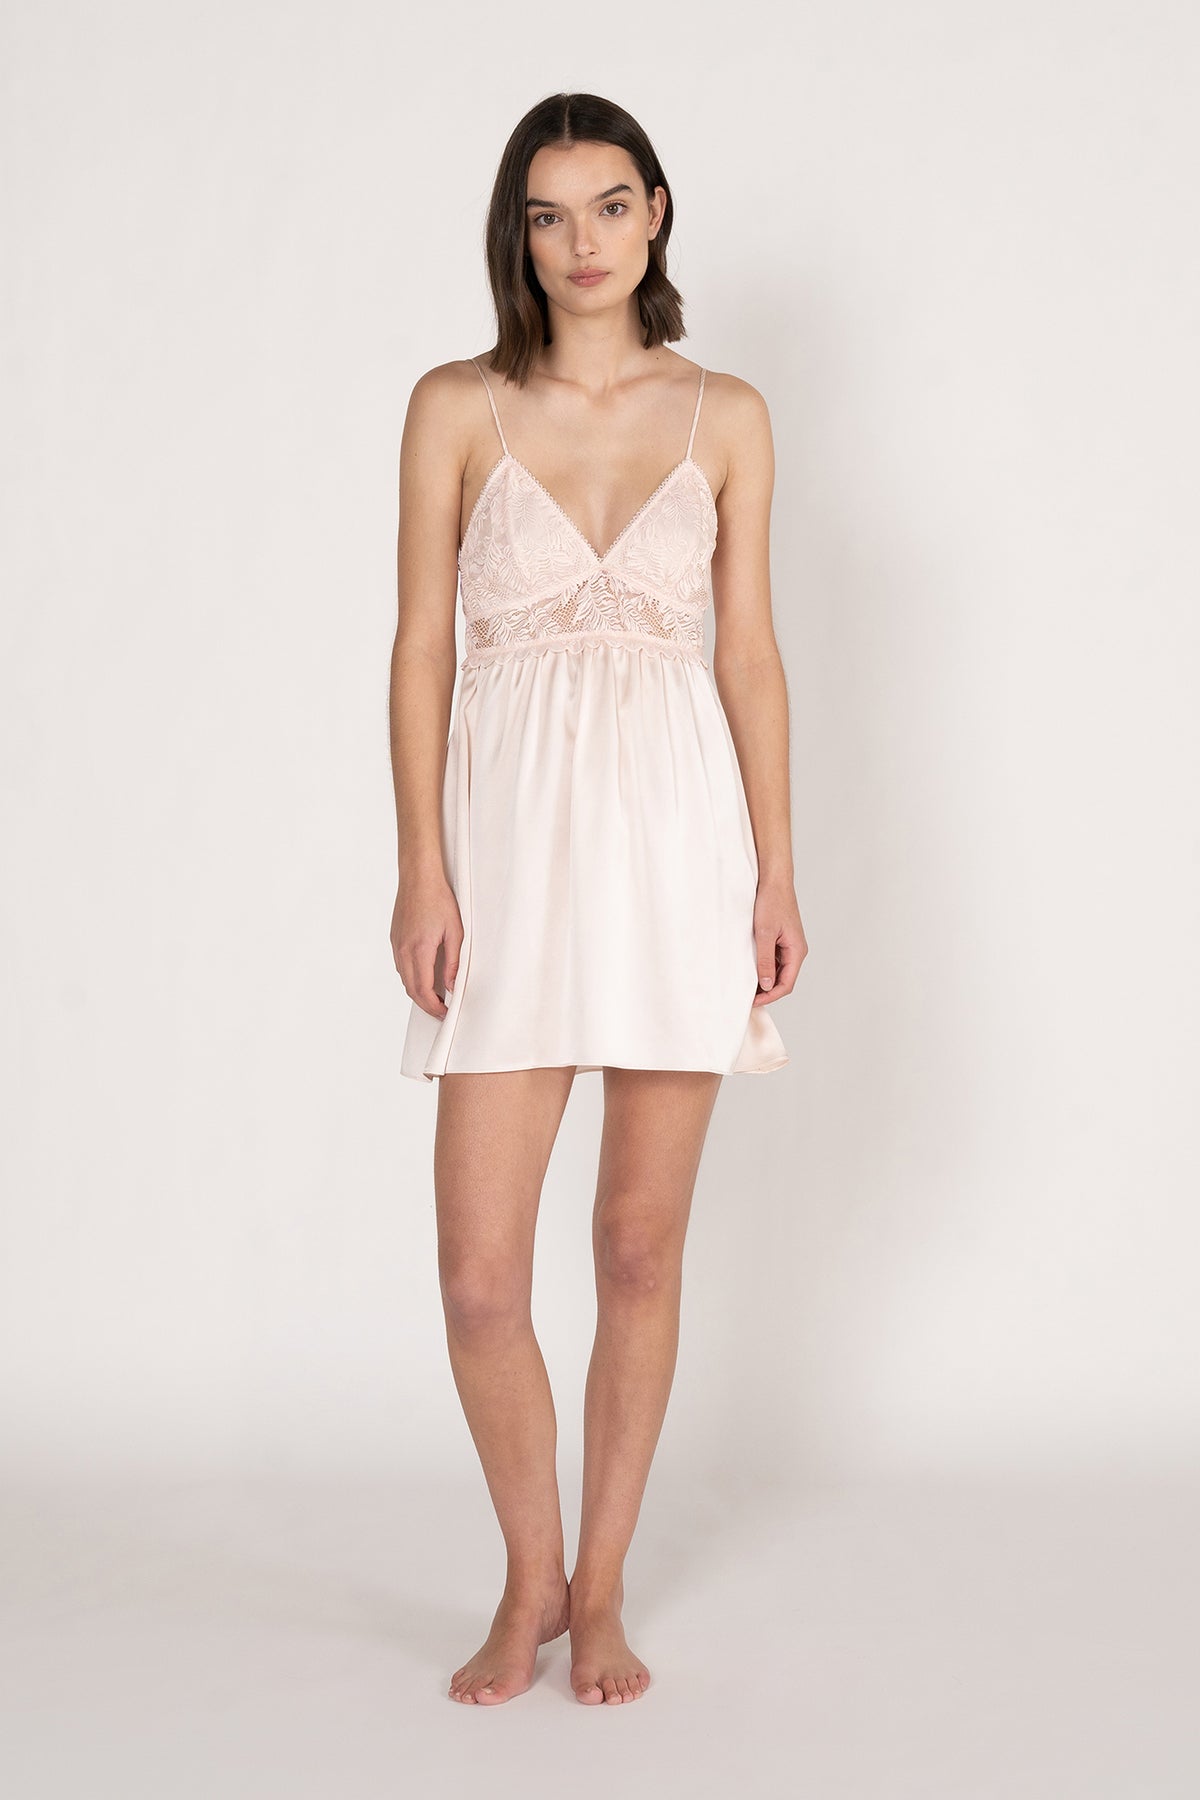 The Stretch Lace Chemise in Primrose Pink from Ginia